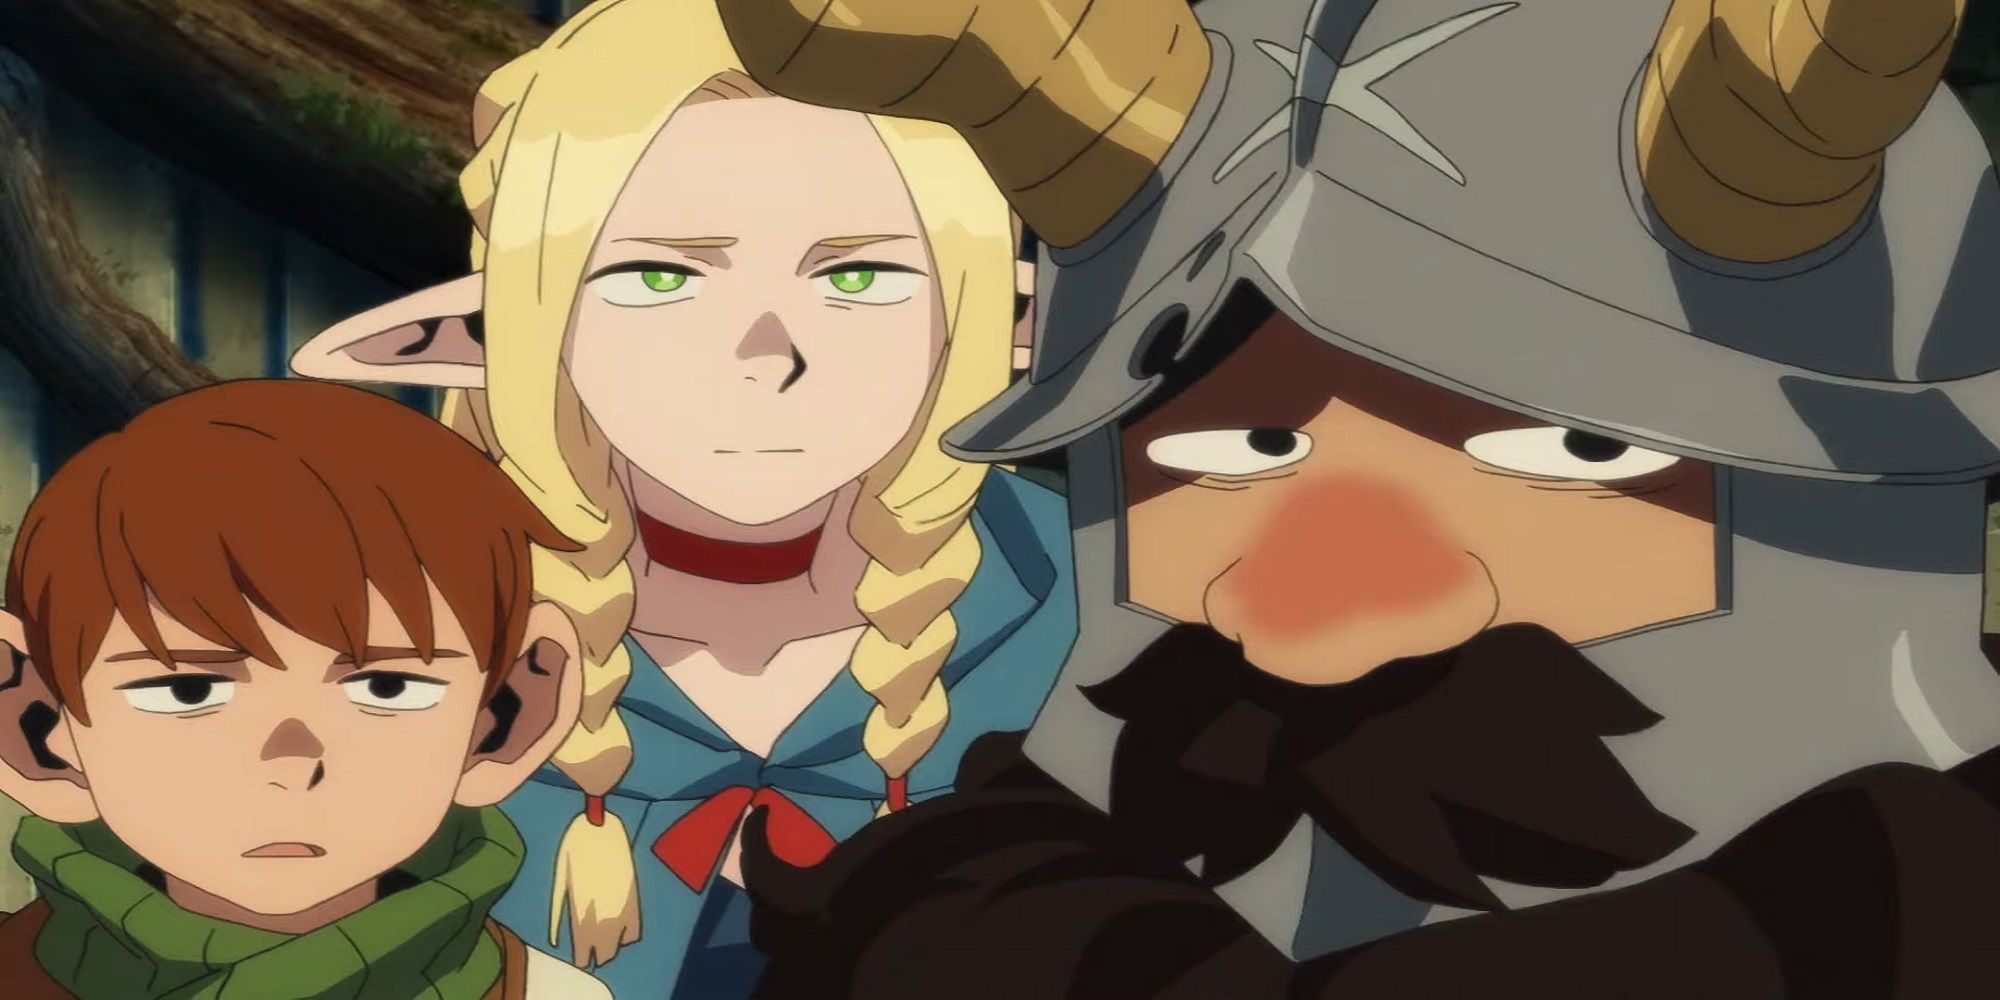 Delicious In Dungeon Story, Latest News, & Everything We Know So Far